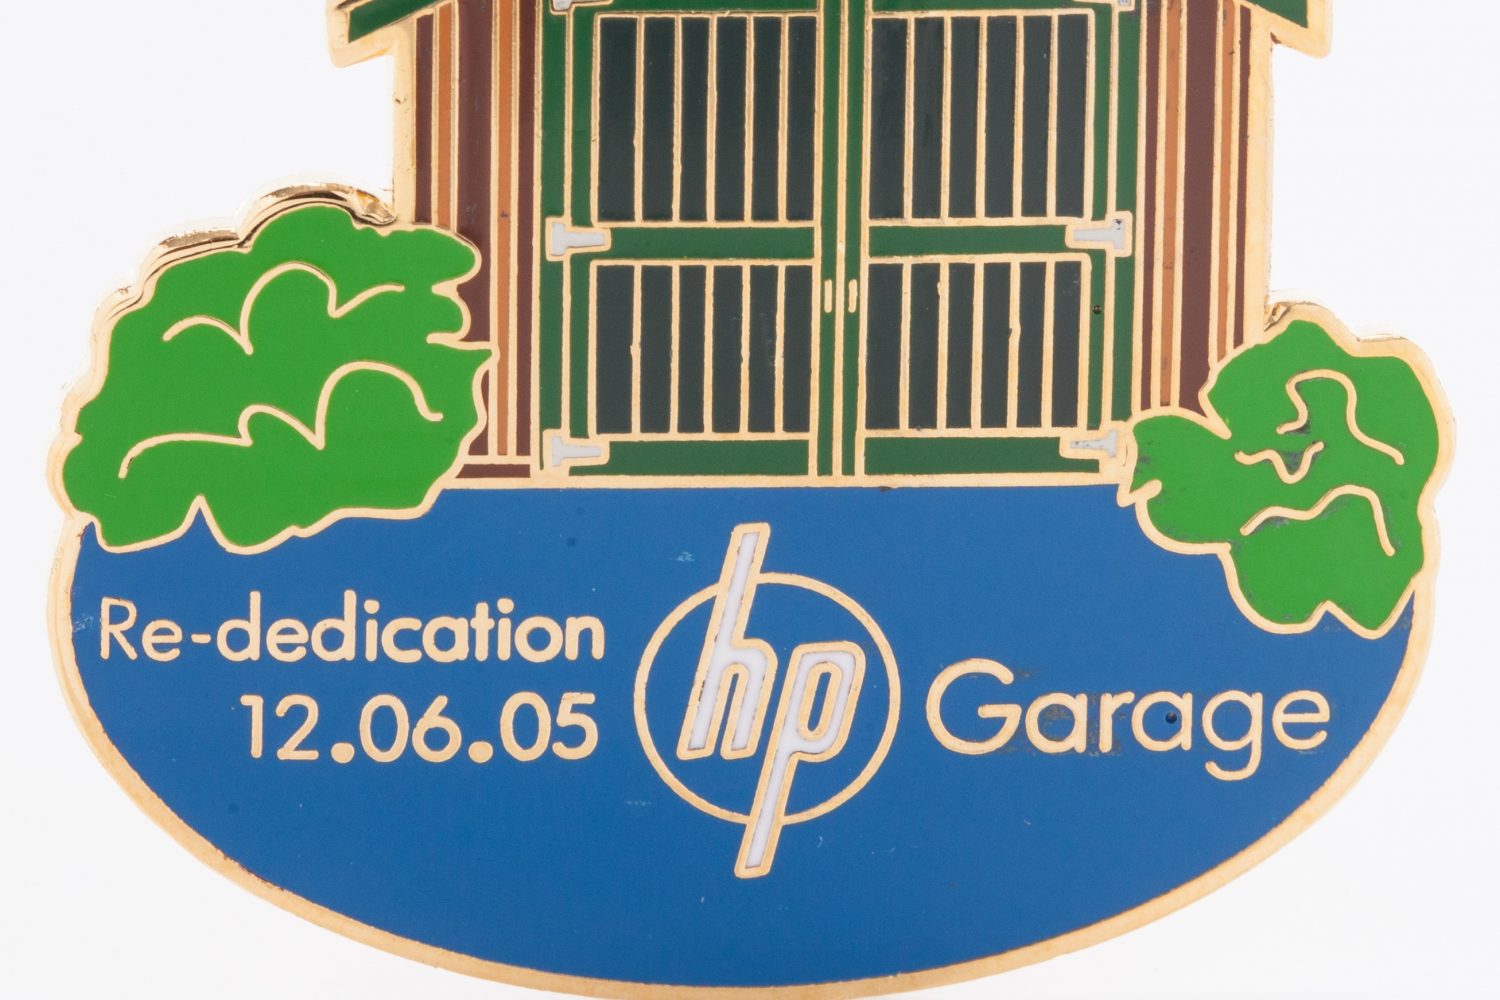 Commemorative pin depicting the Addison Avenue garage and reading Re-dedication 12.05.05 hp garage.